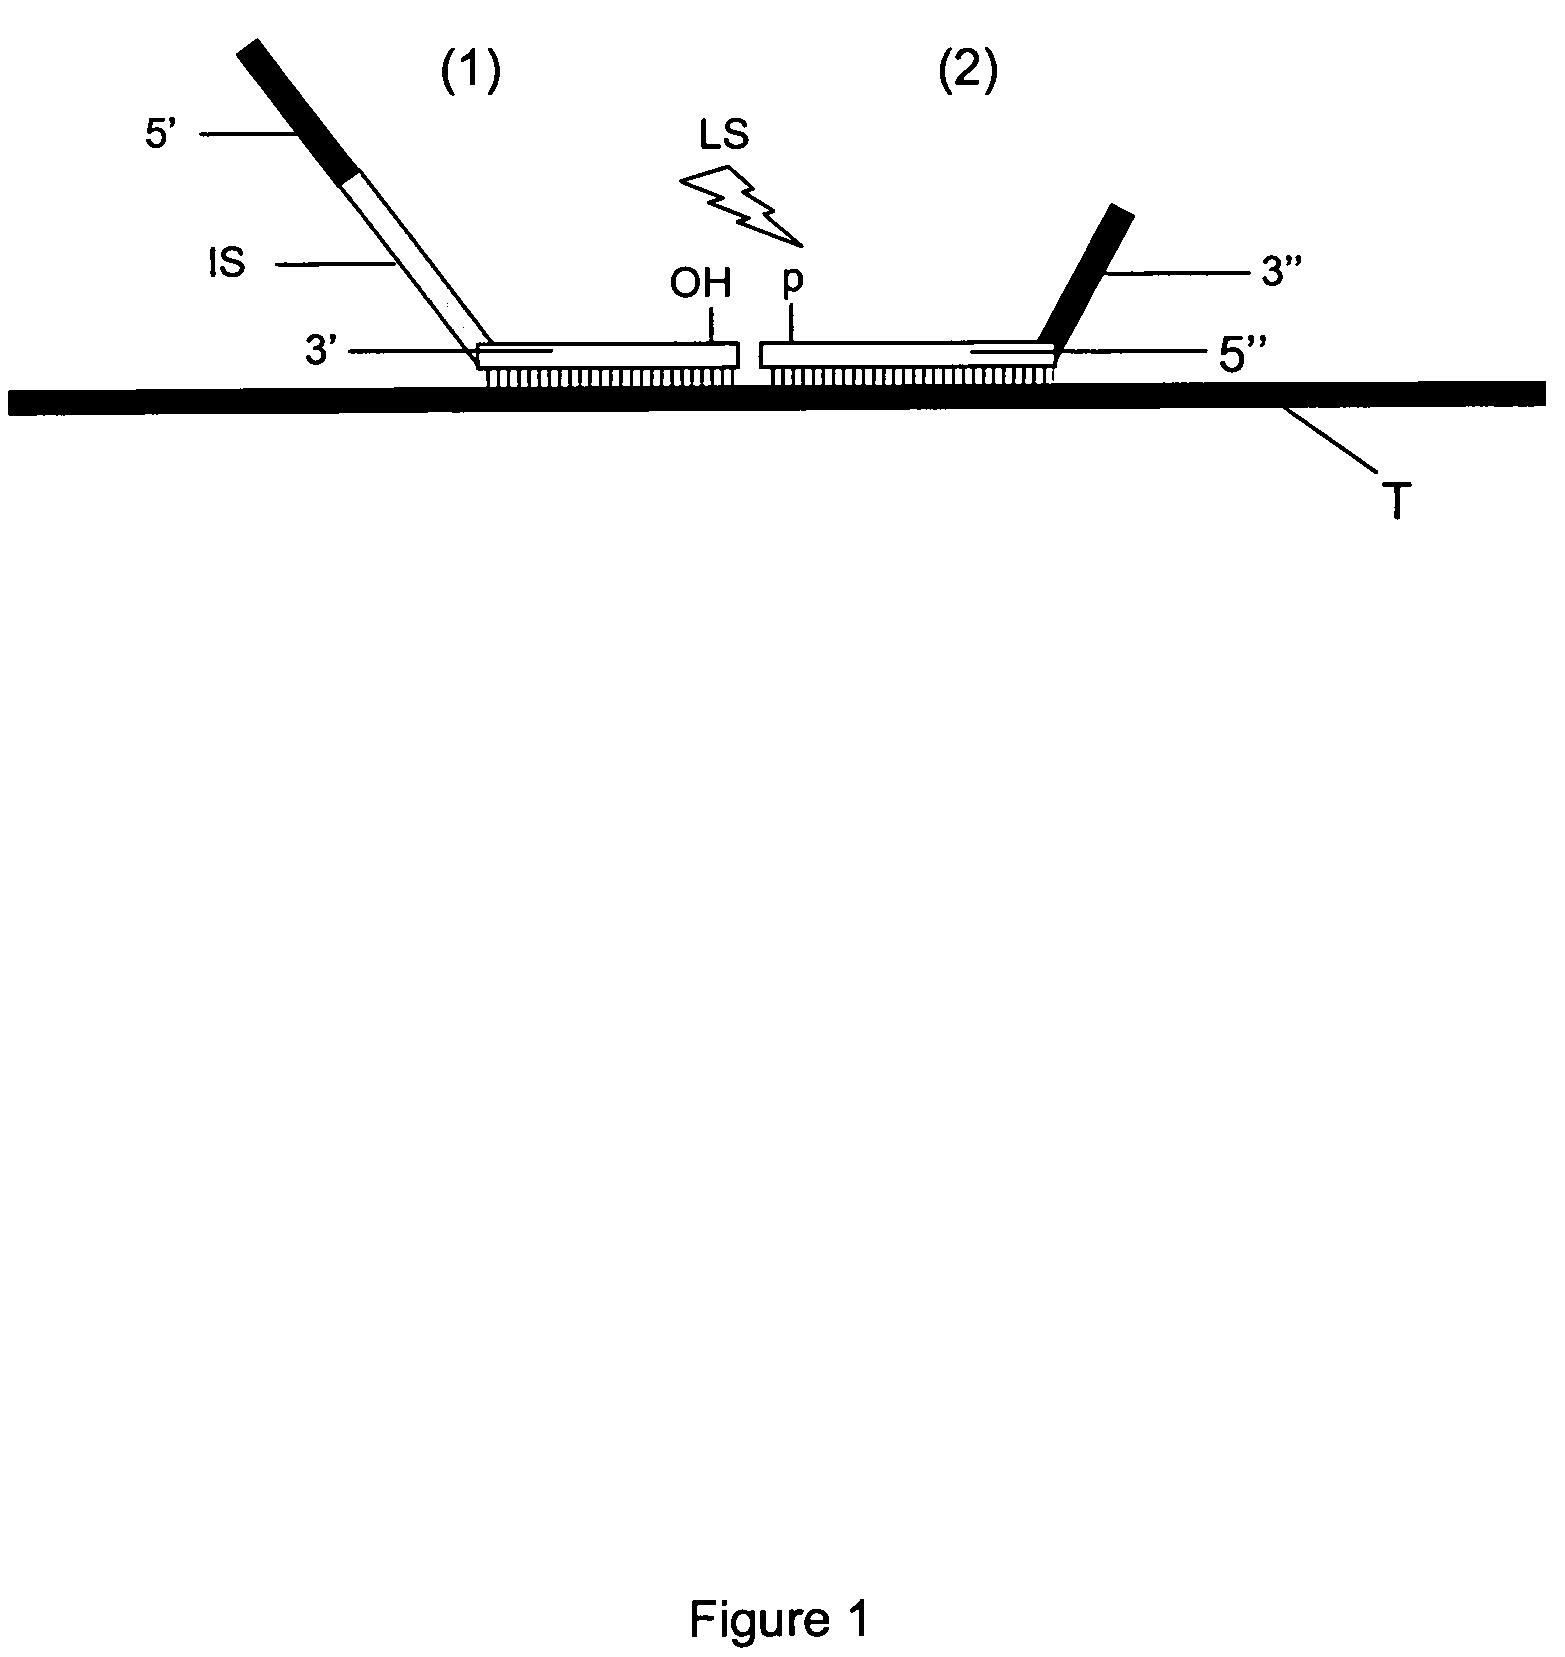 Method for Detection and Quantification of Target Nucleic Acids in a Sample